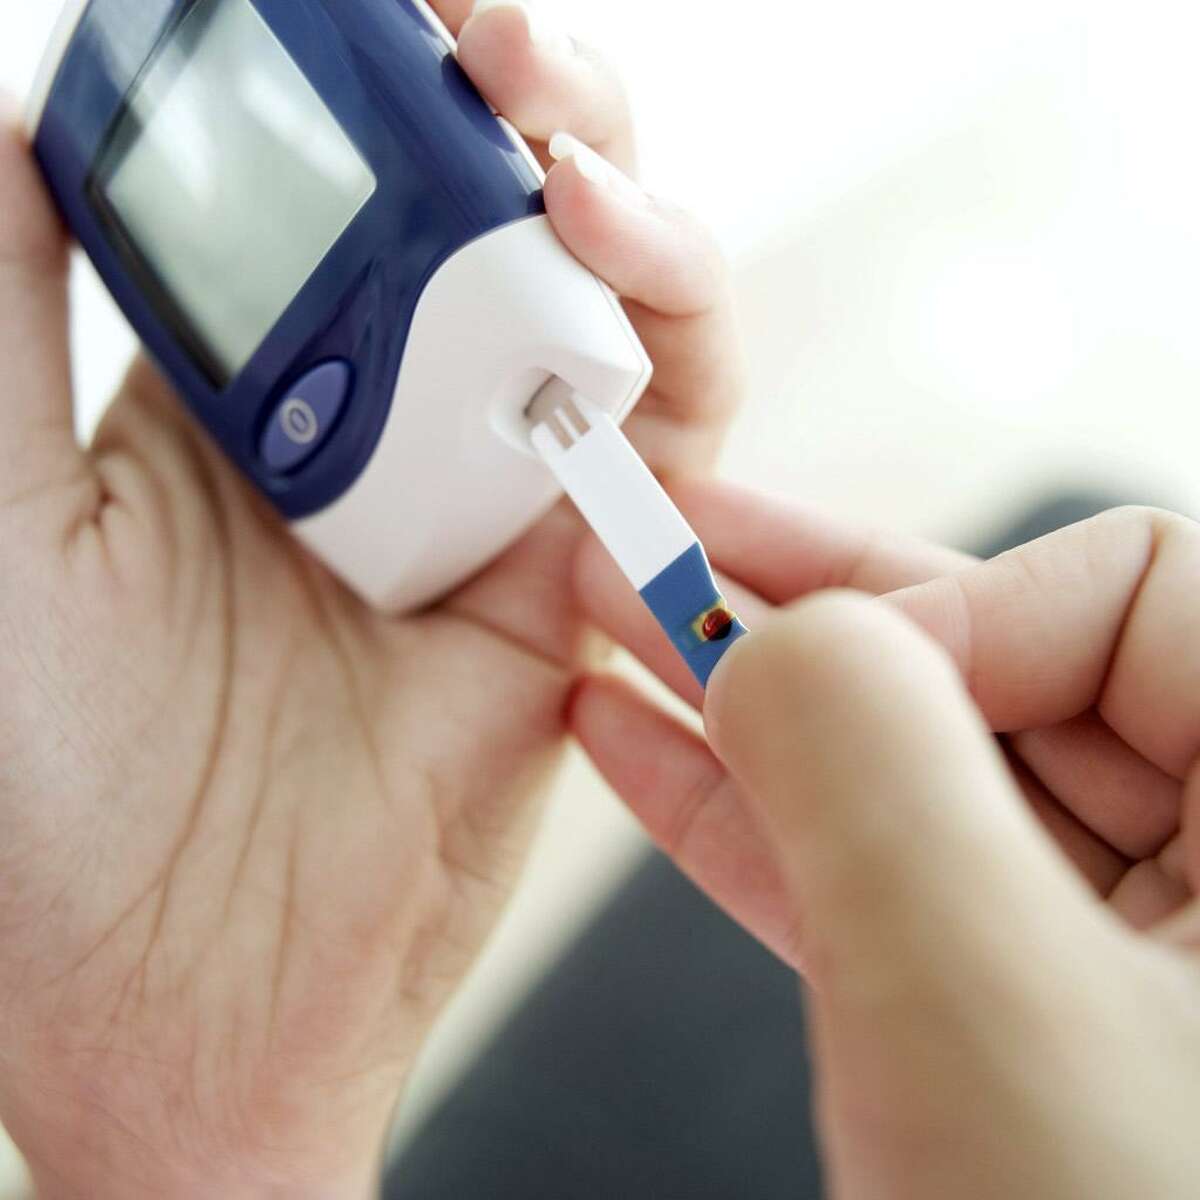 Griffin Hospital will host a free discussion of diabetes medications on Tuesday, Sept. 10.